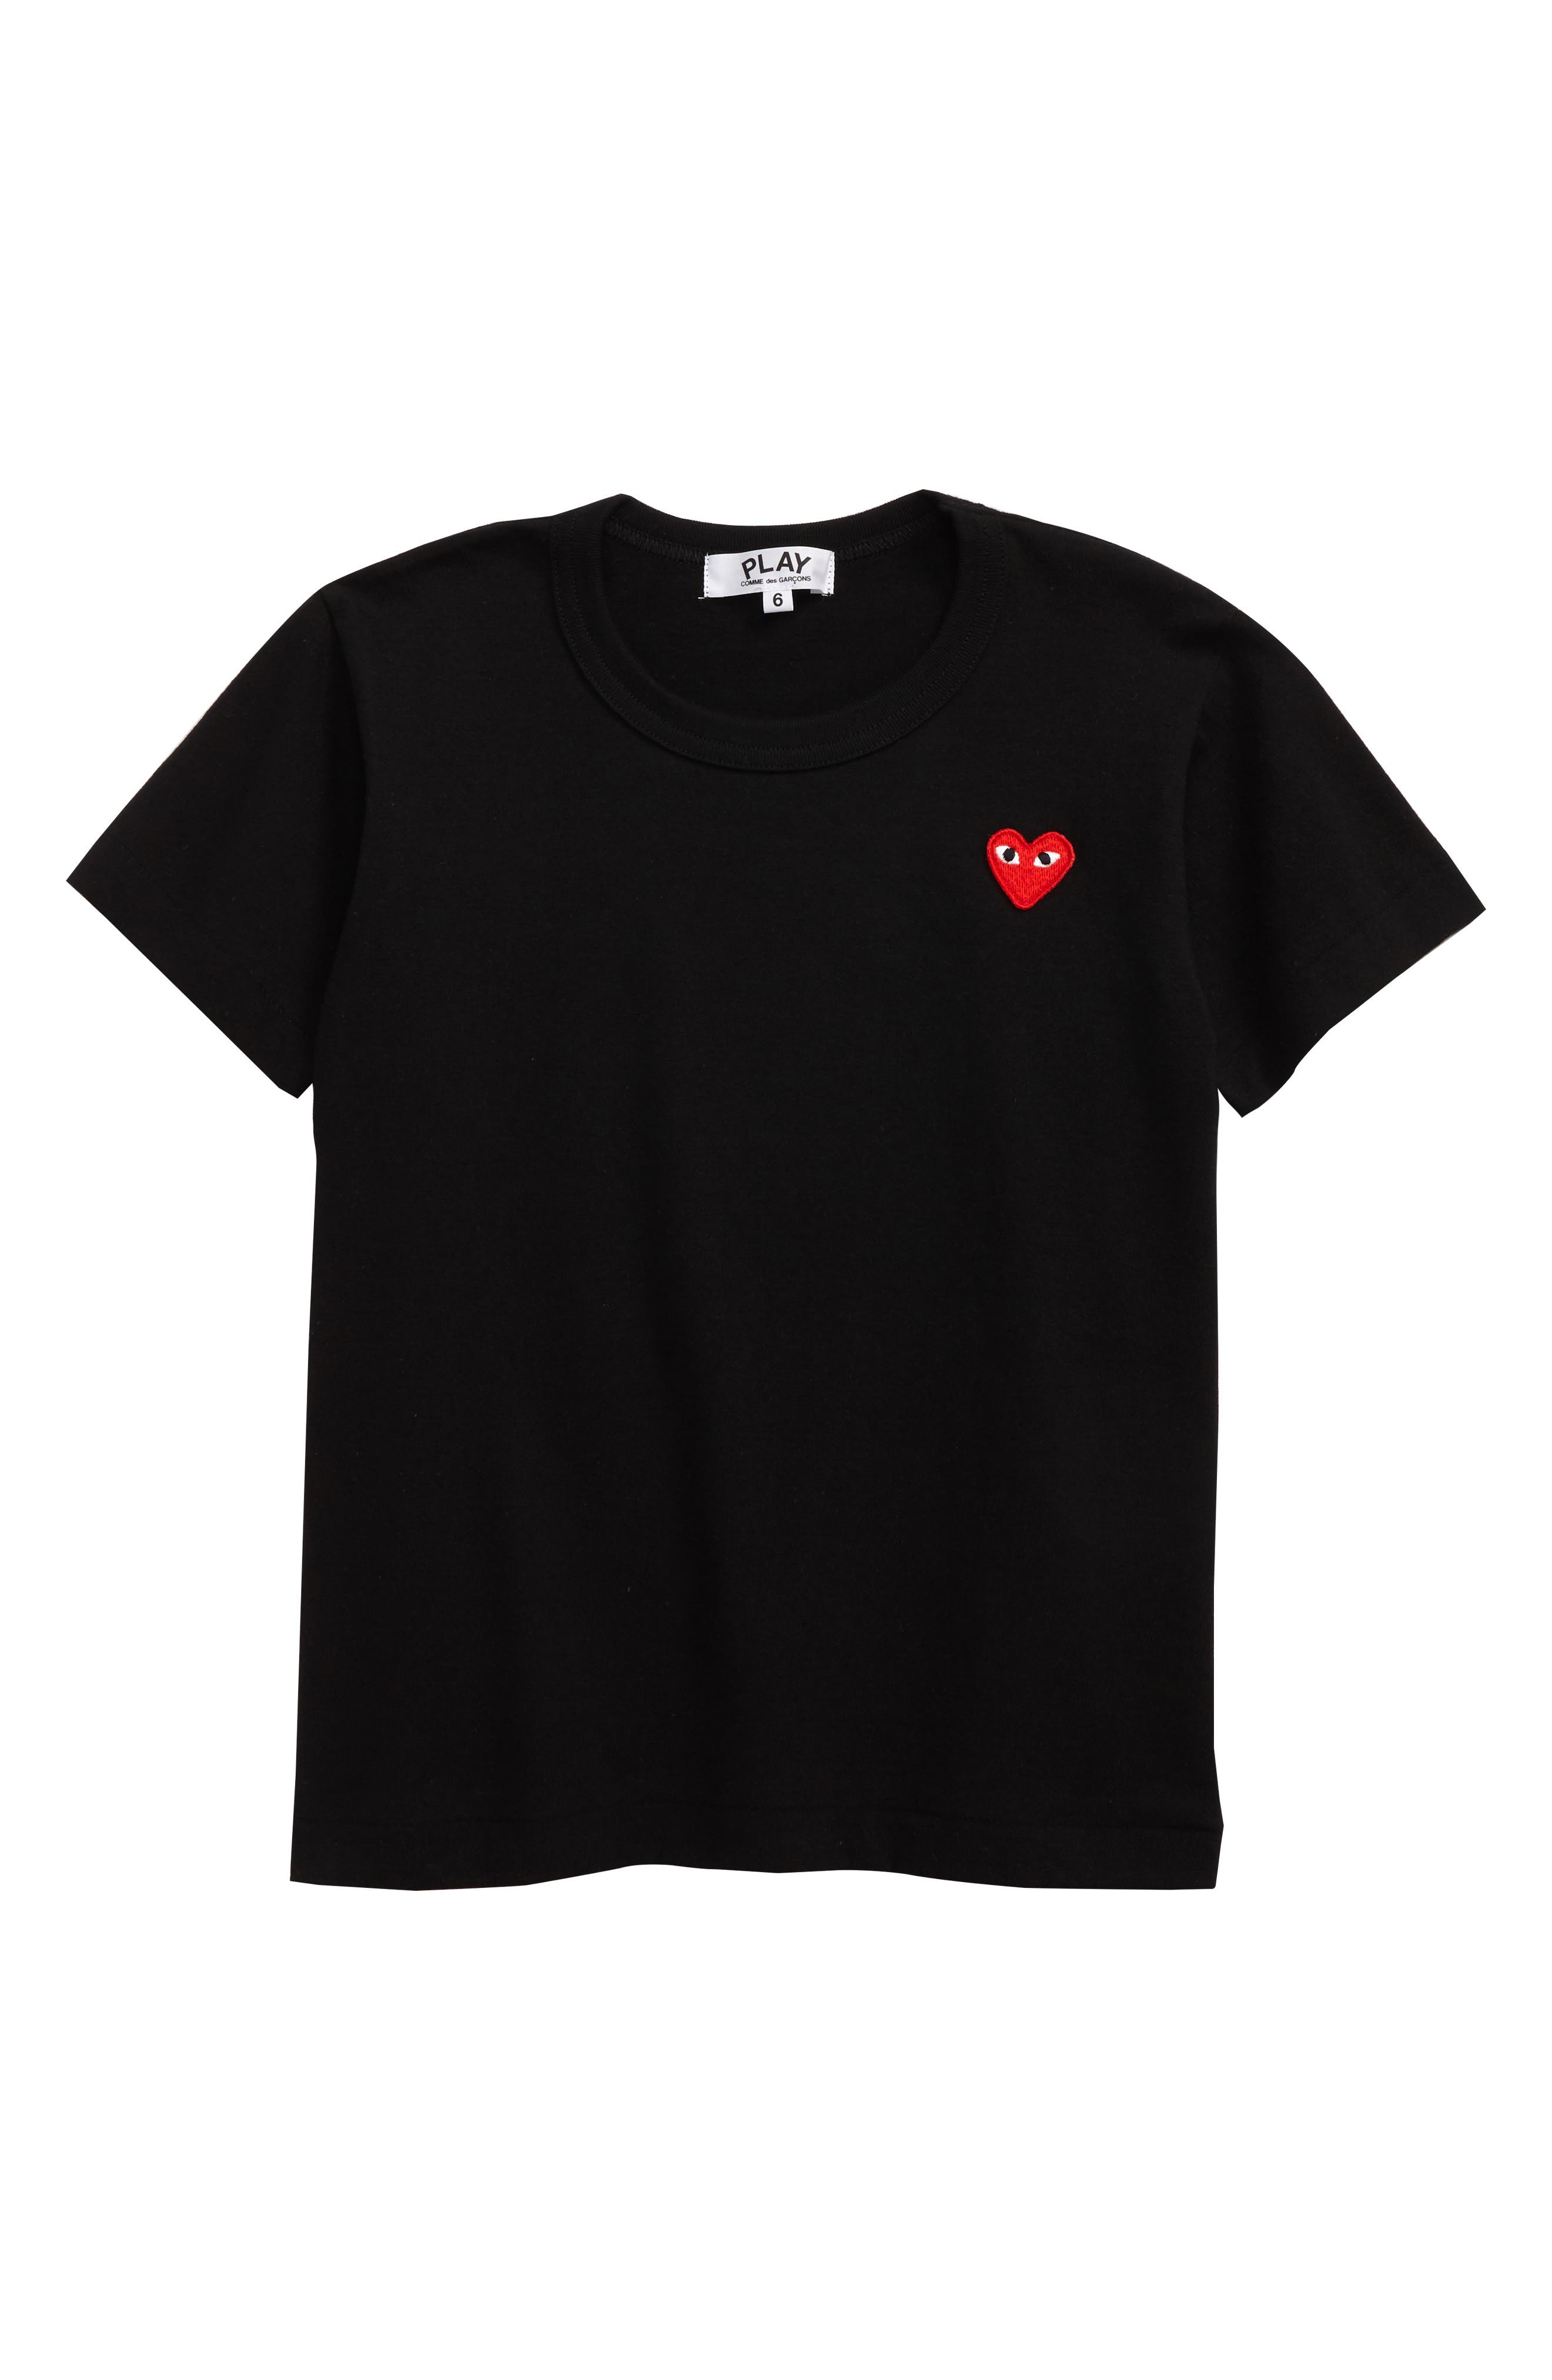 converse shirt with heart